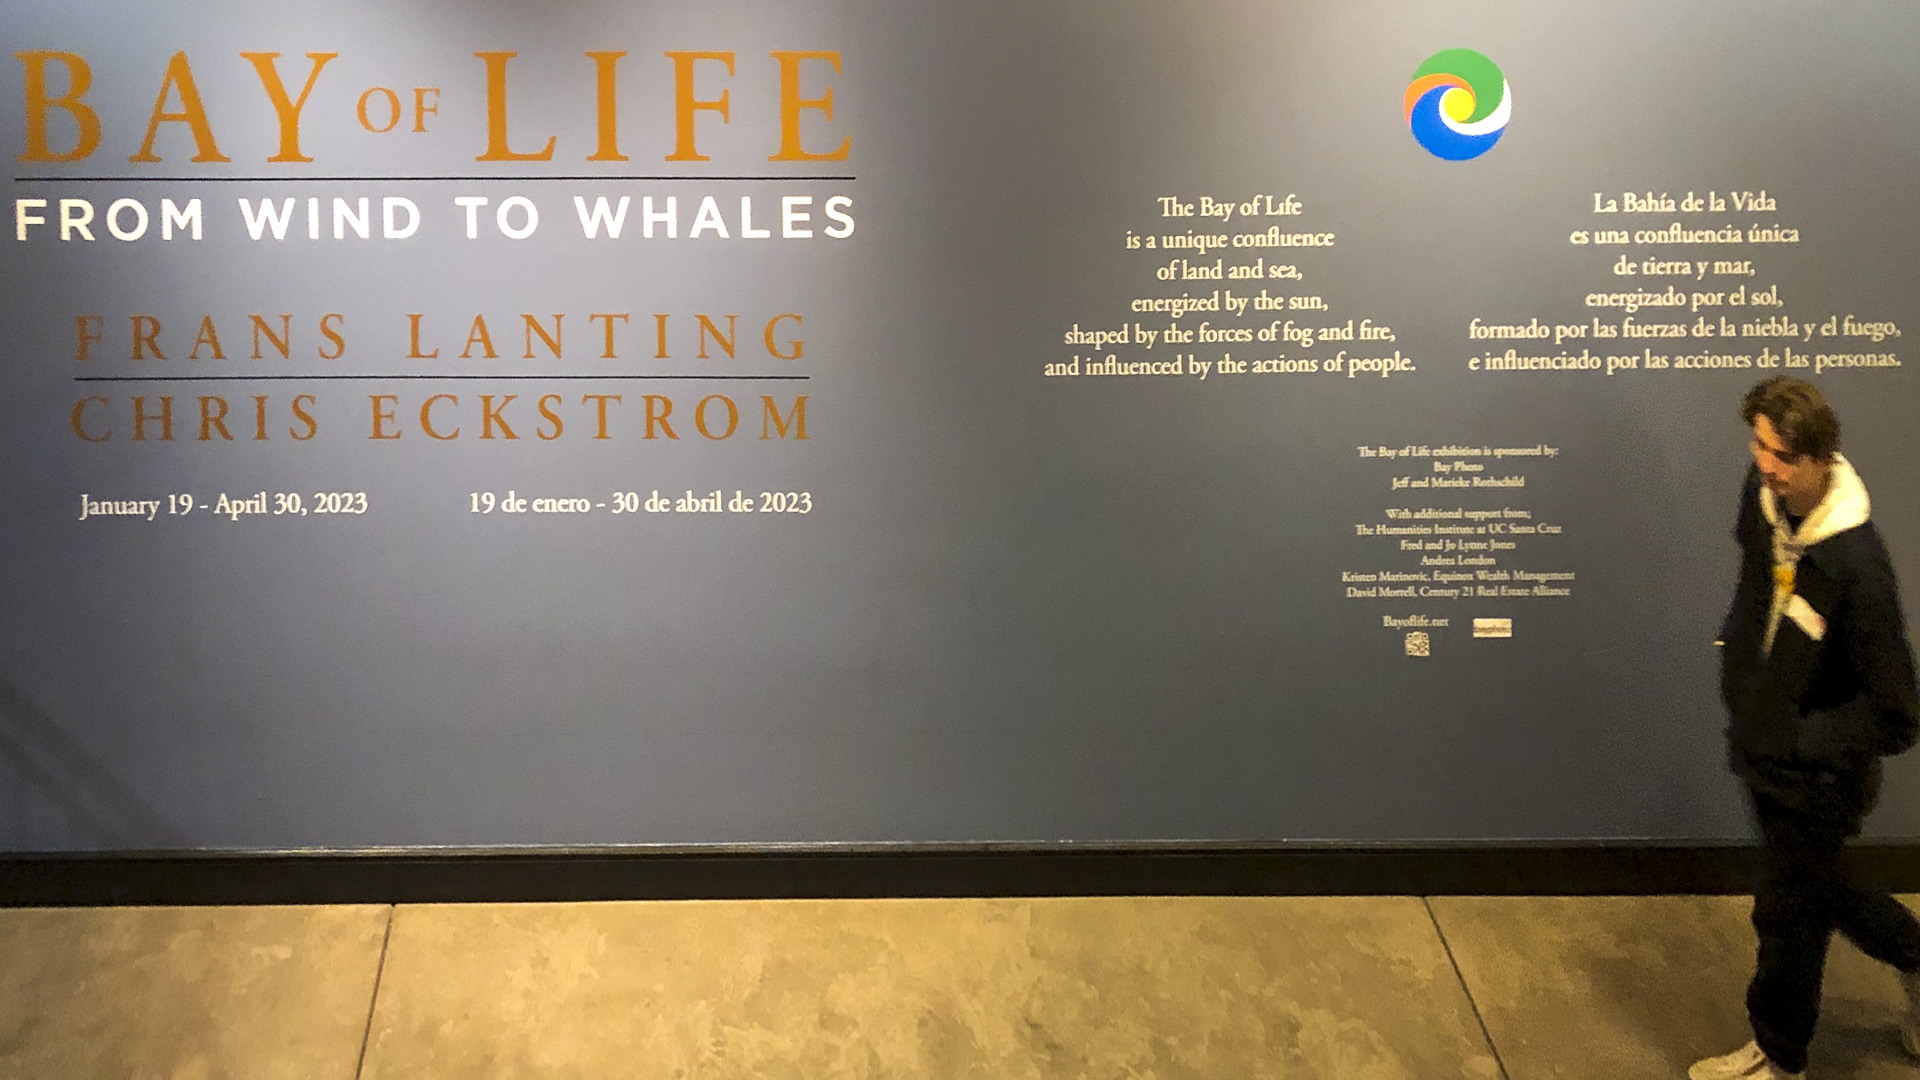 The Bay of Life Exhibit at MAH, January 21, 2023 (by D Shrestha Ross CC BY-SA)